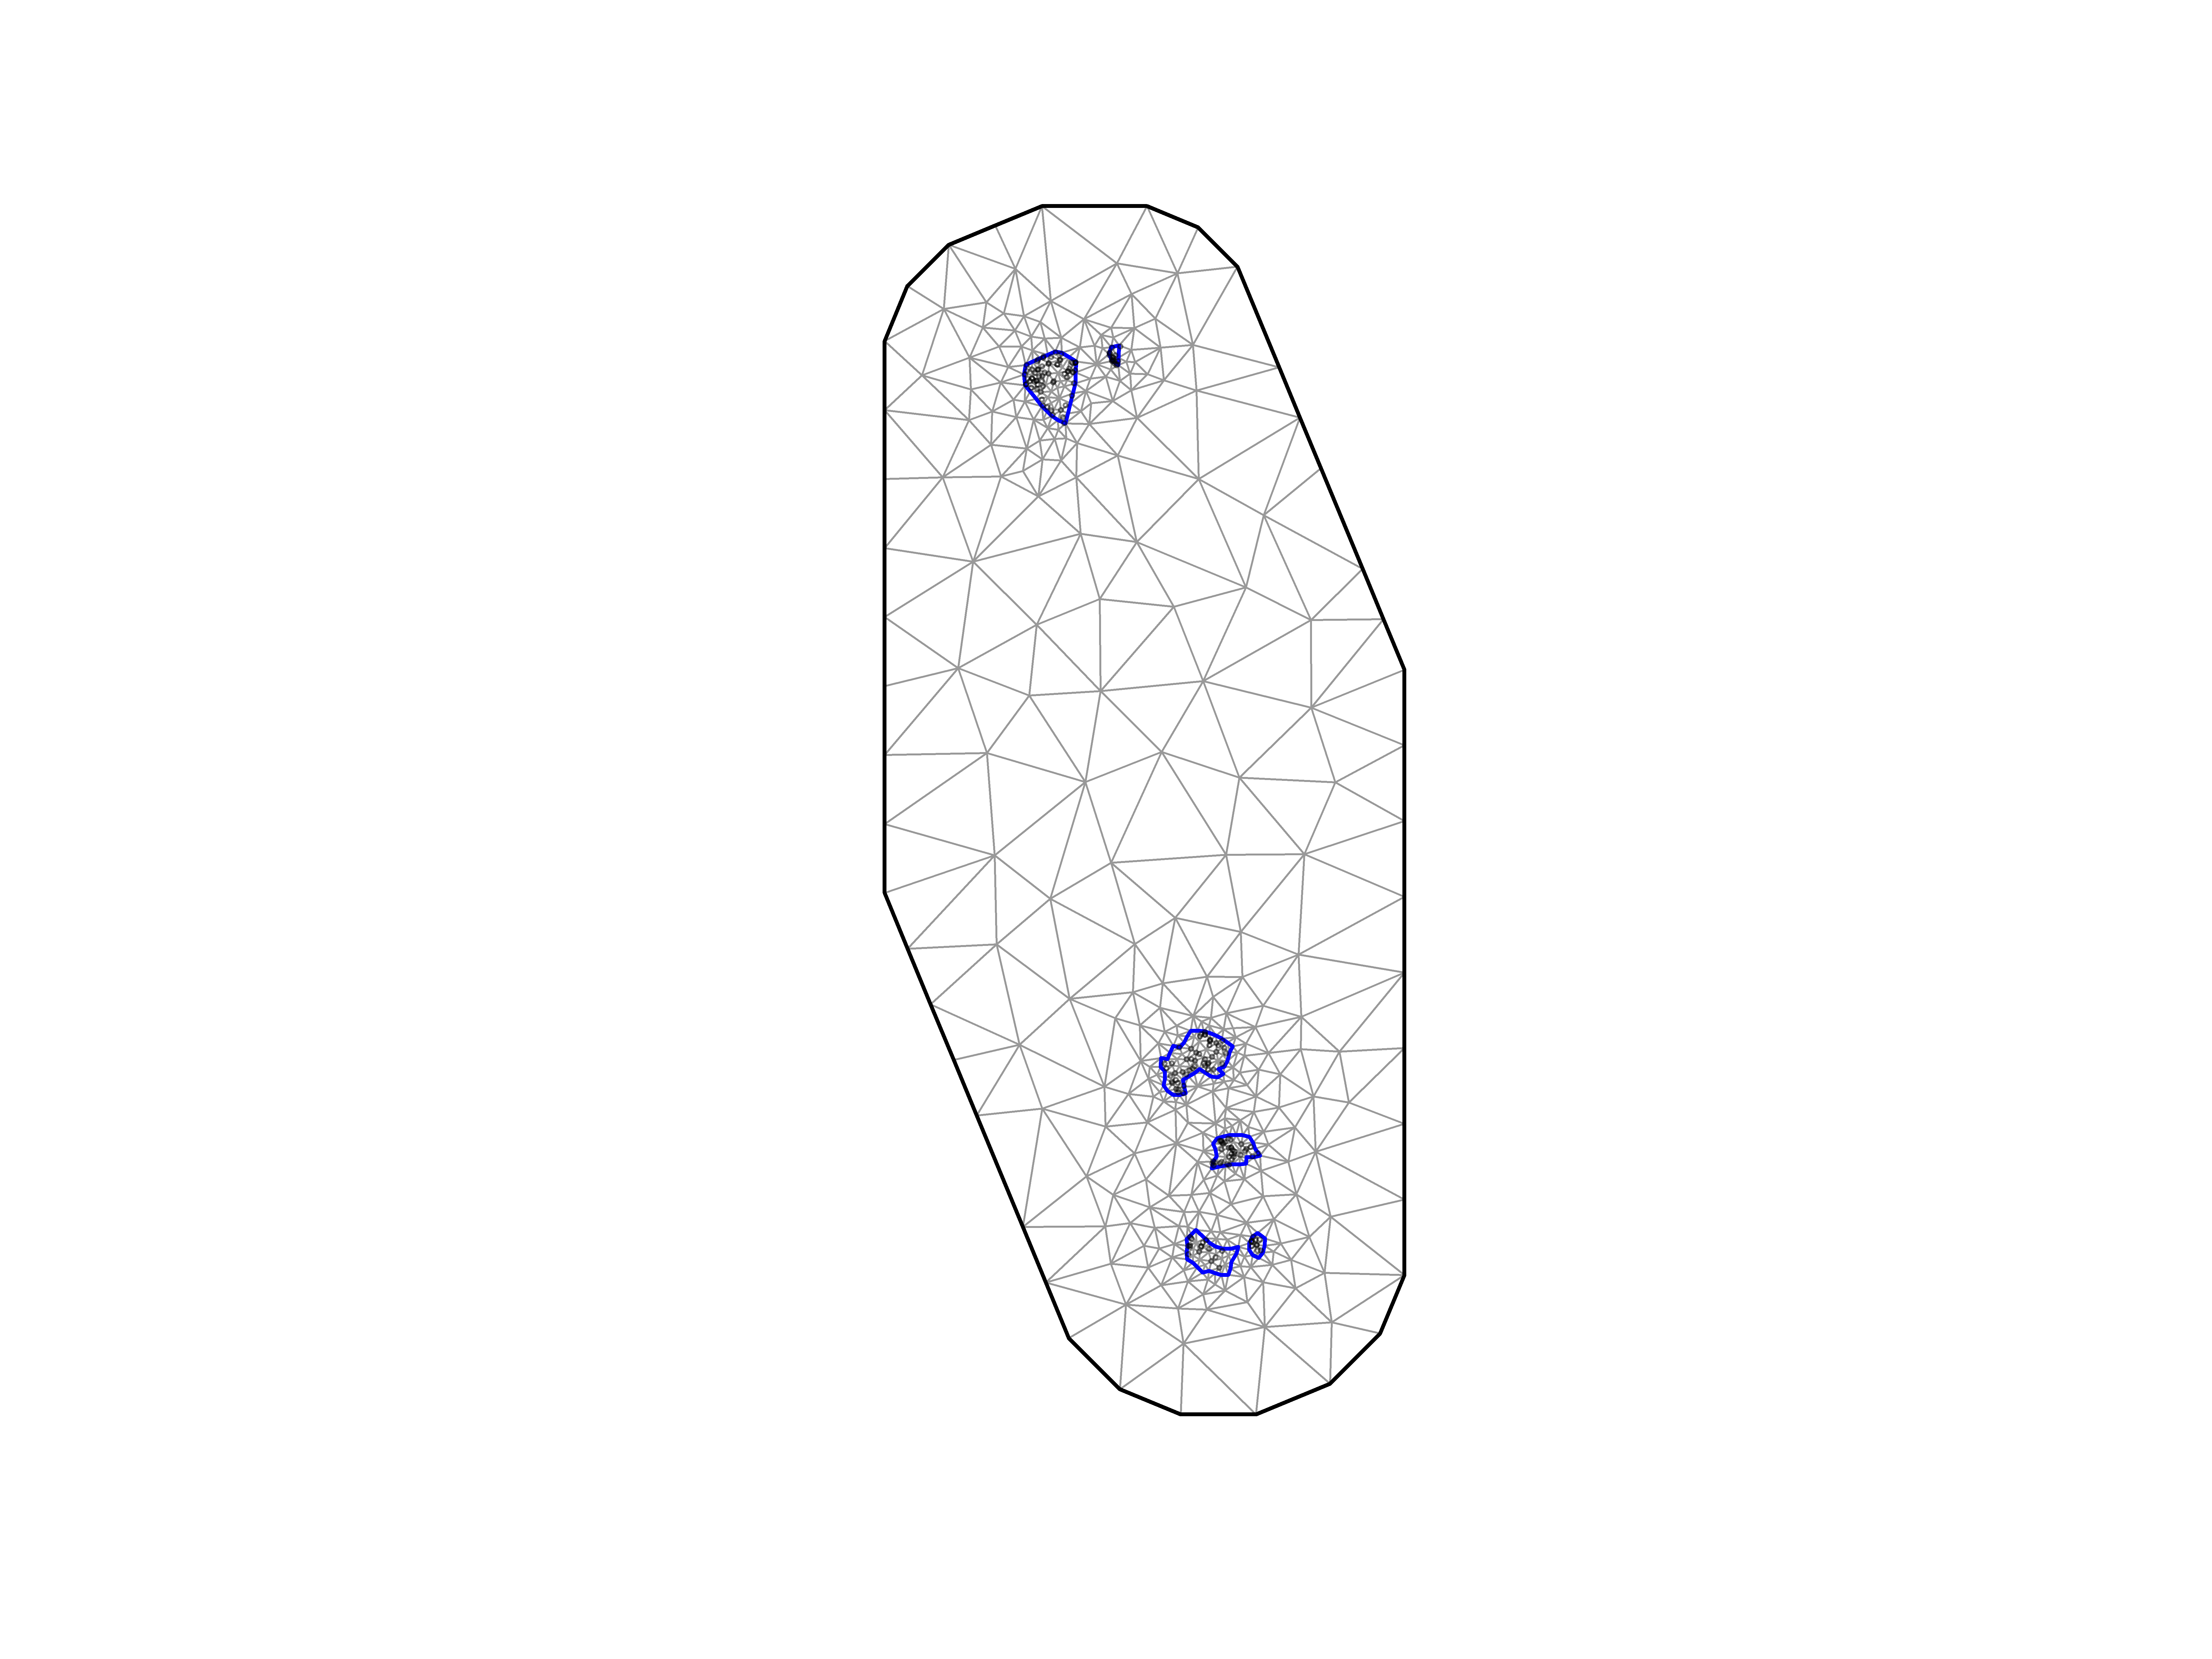 Mesh used in the spatial GAMM to estimate density. Black lines represent mesh vertices, blue lines inner boundaries of scallop beds, and black circles observed data points.